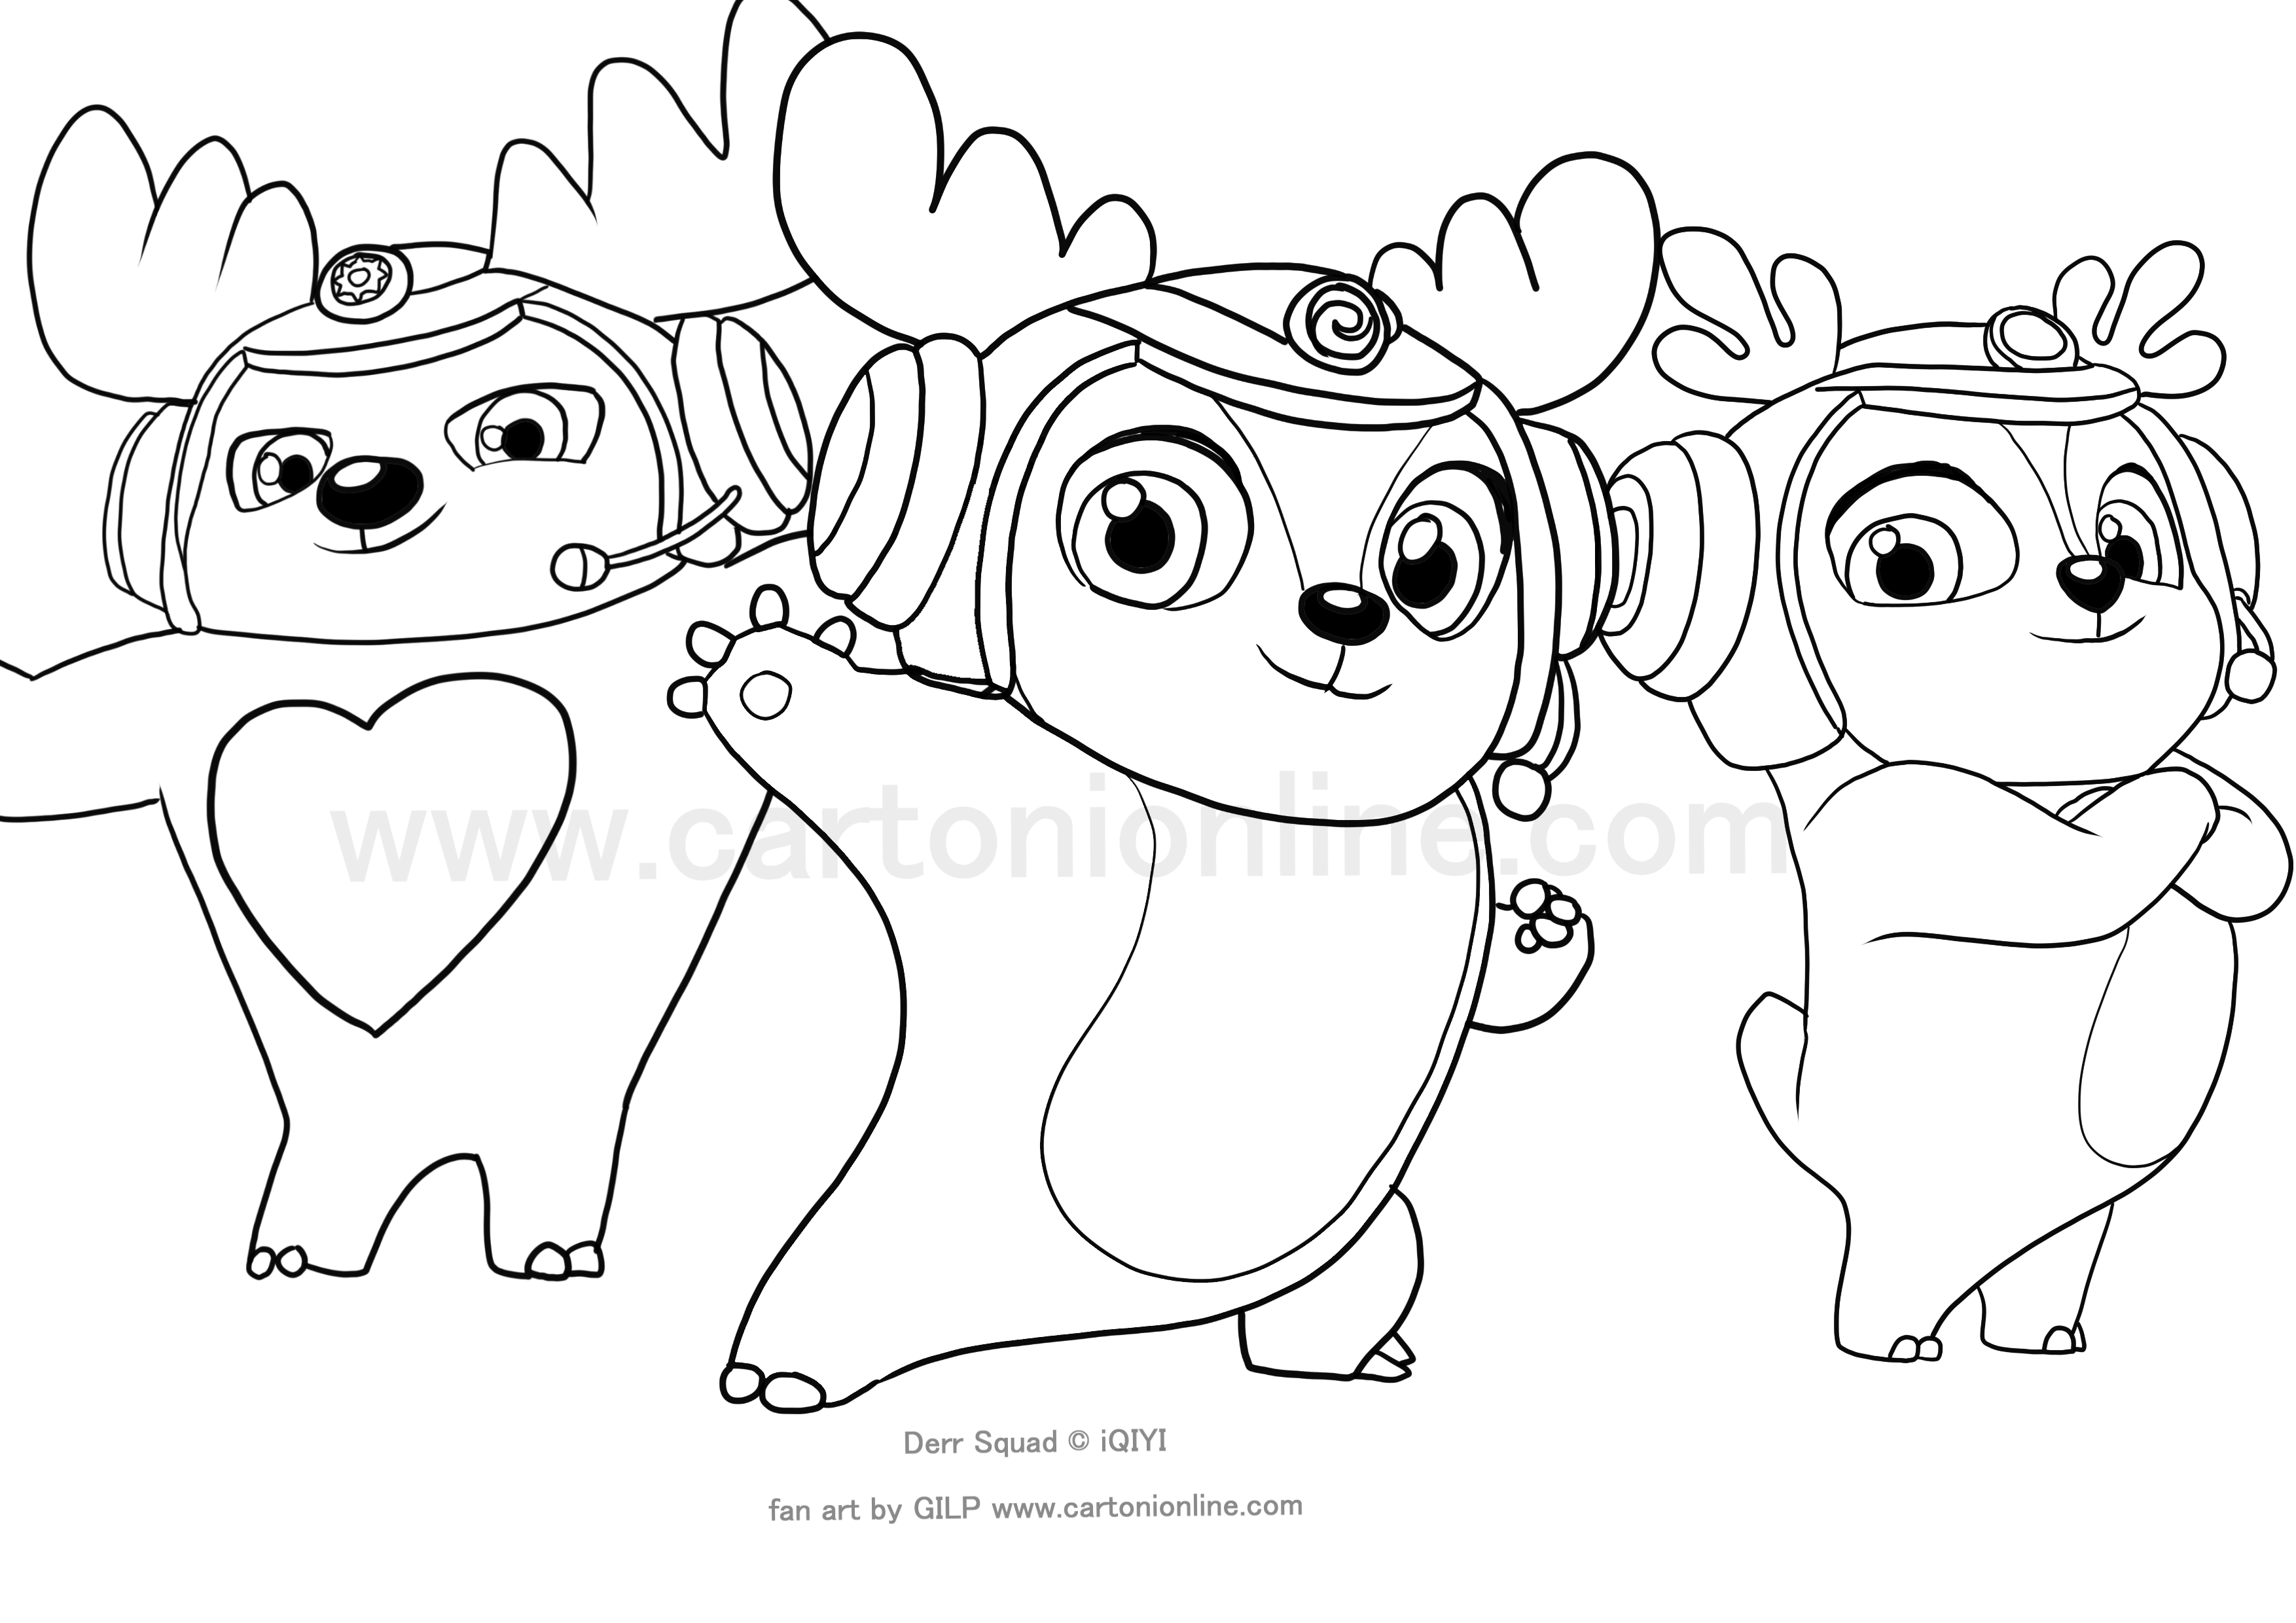 Deer Squad coloring page